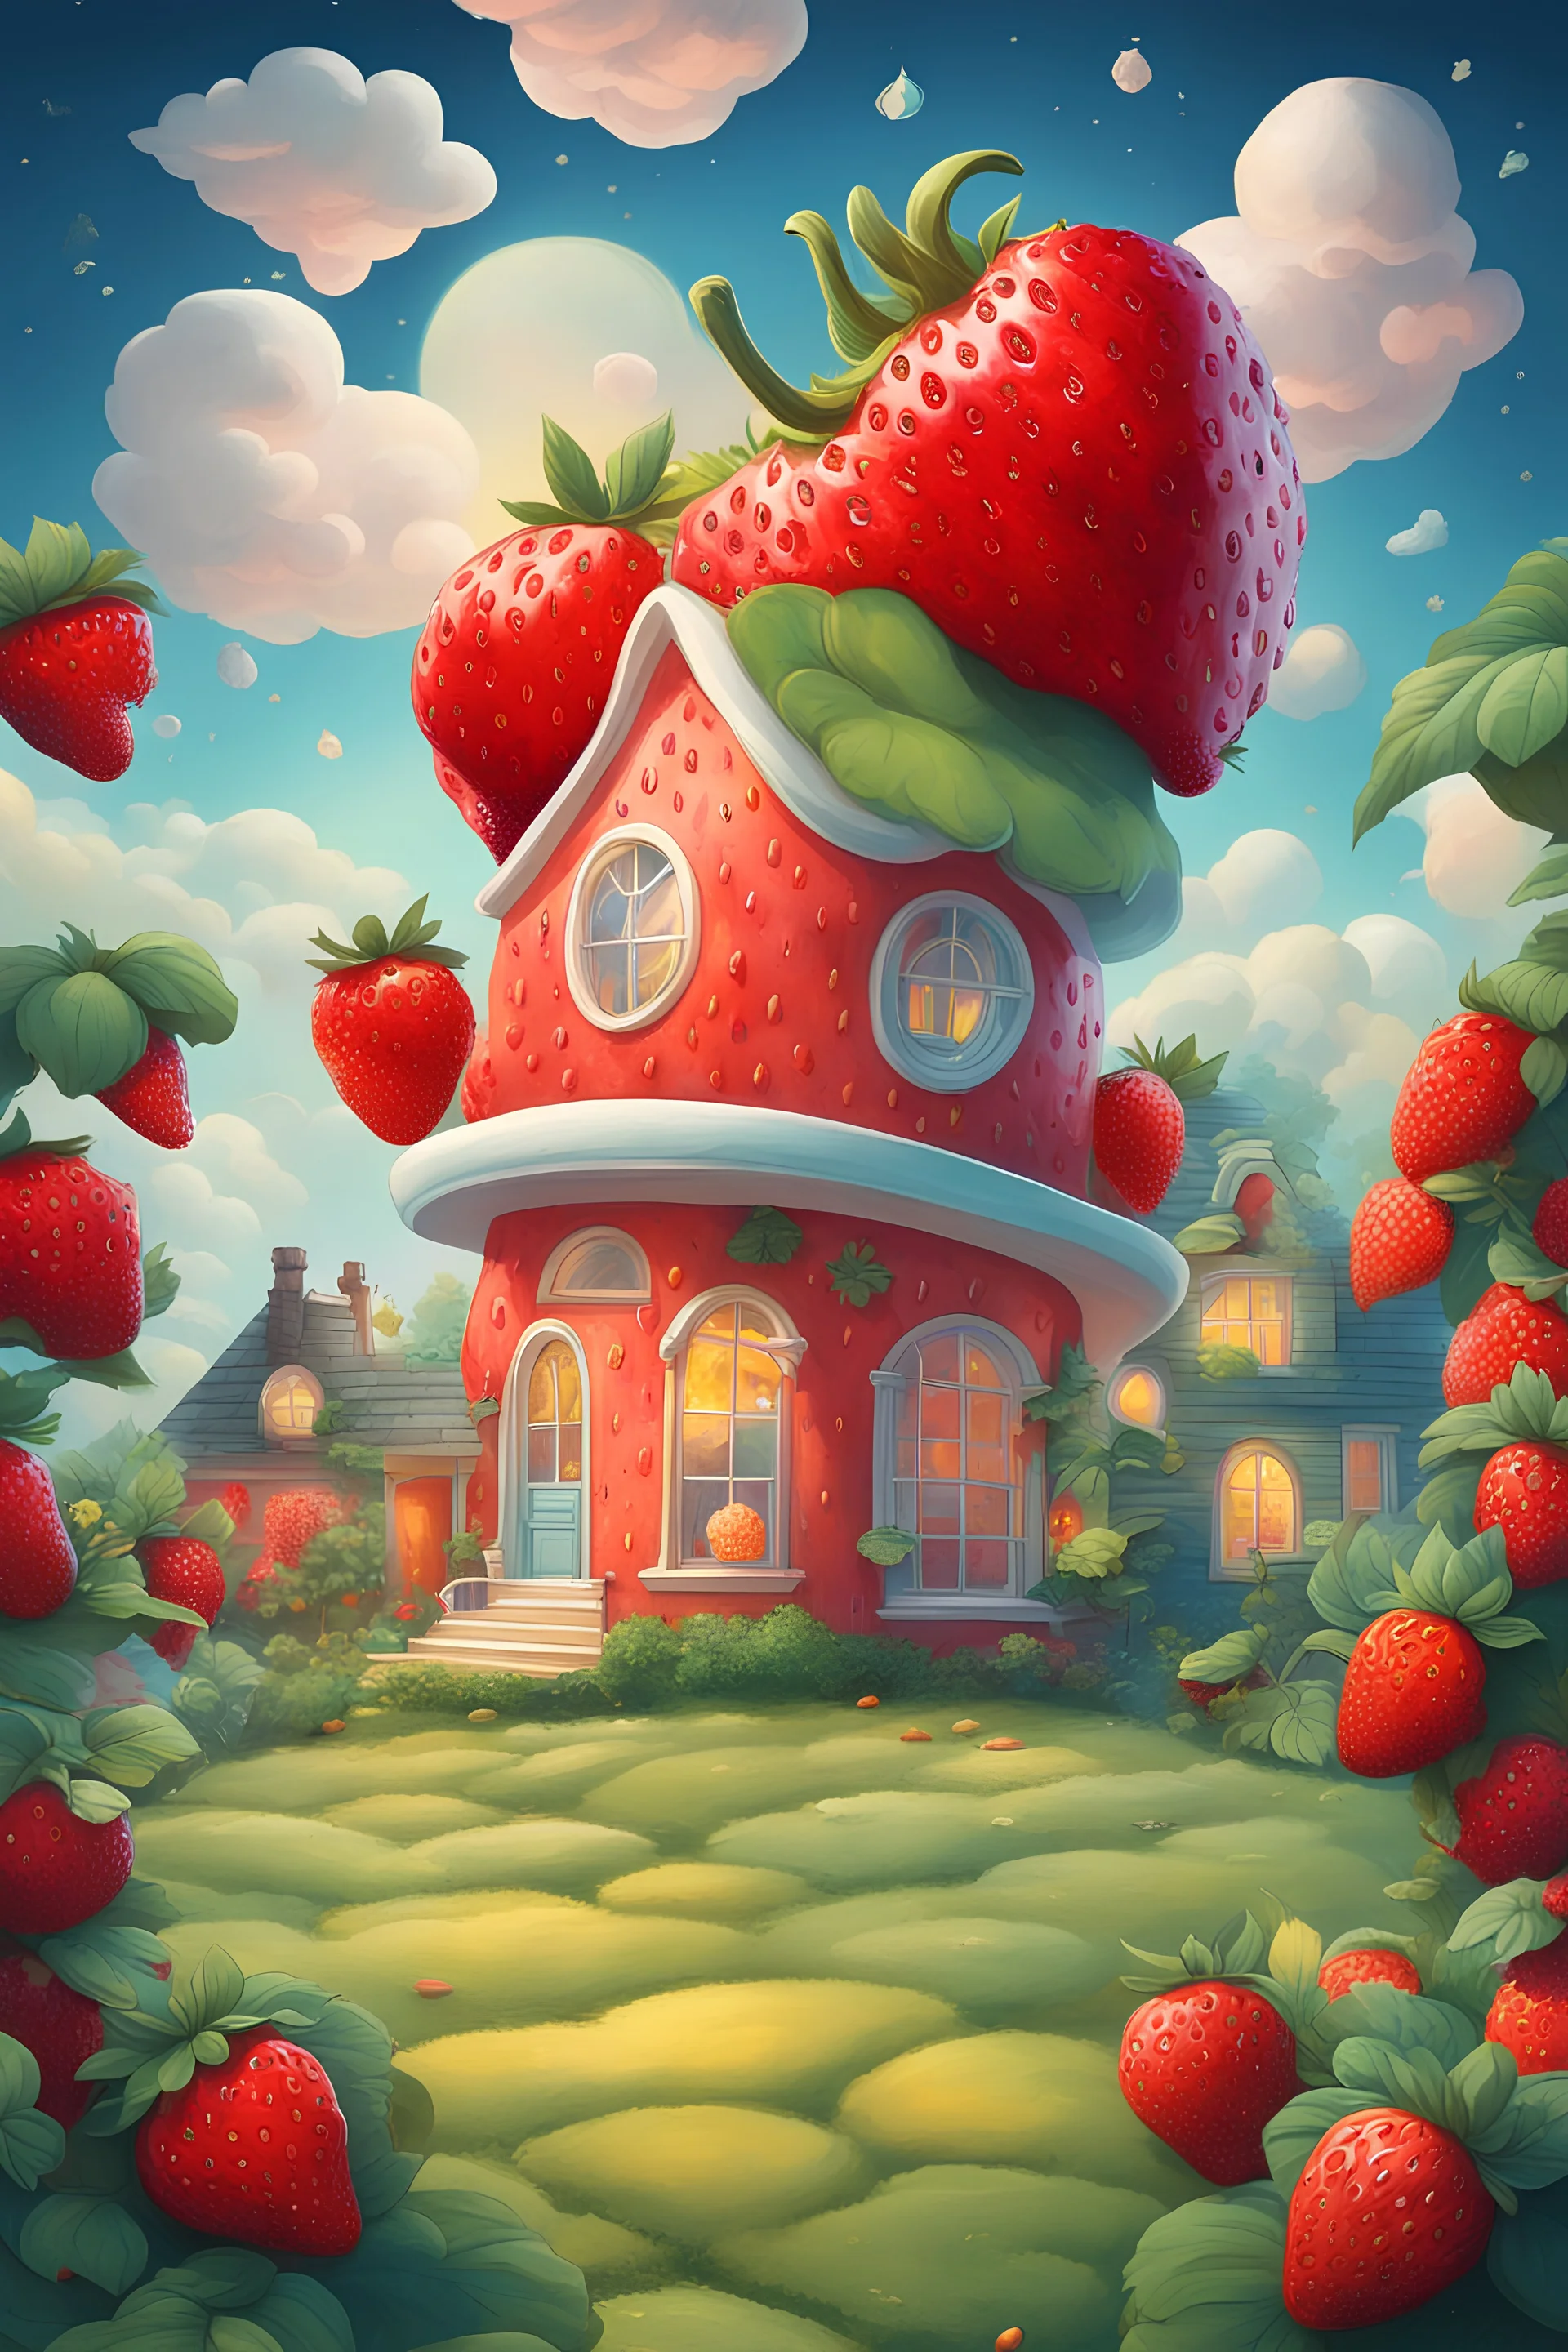 An advertisement poster for a cartoon character, a strawberry, a lemon, and a fantasy cloud, and a dazzling background for a house shaped like a strawberry and a garden.